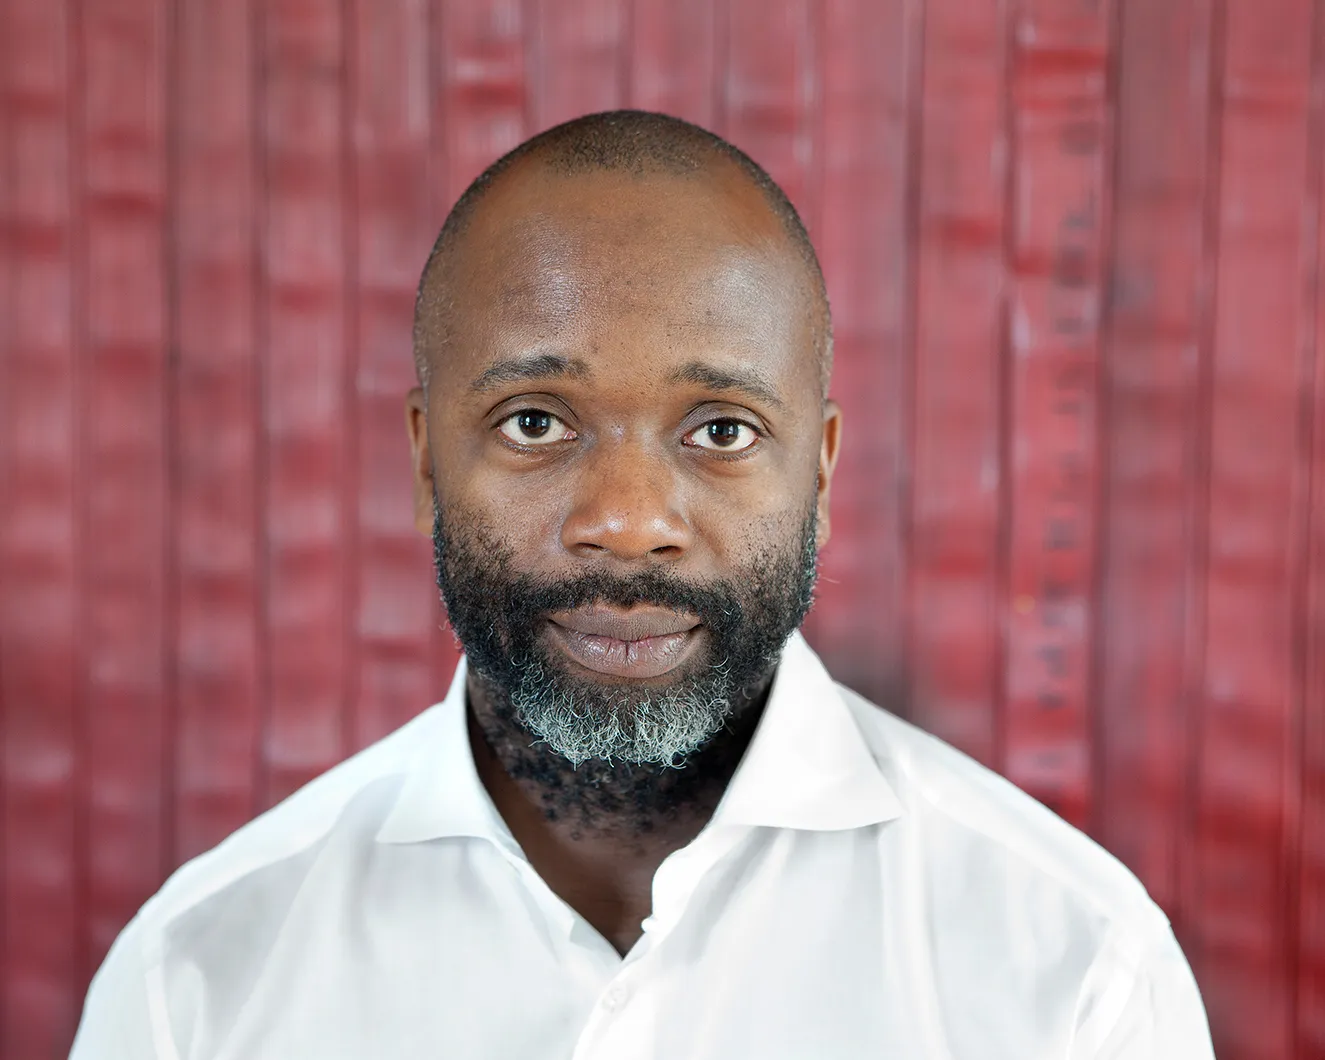 Theaster Gates portrait by Sara Pooley